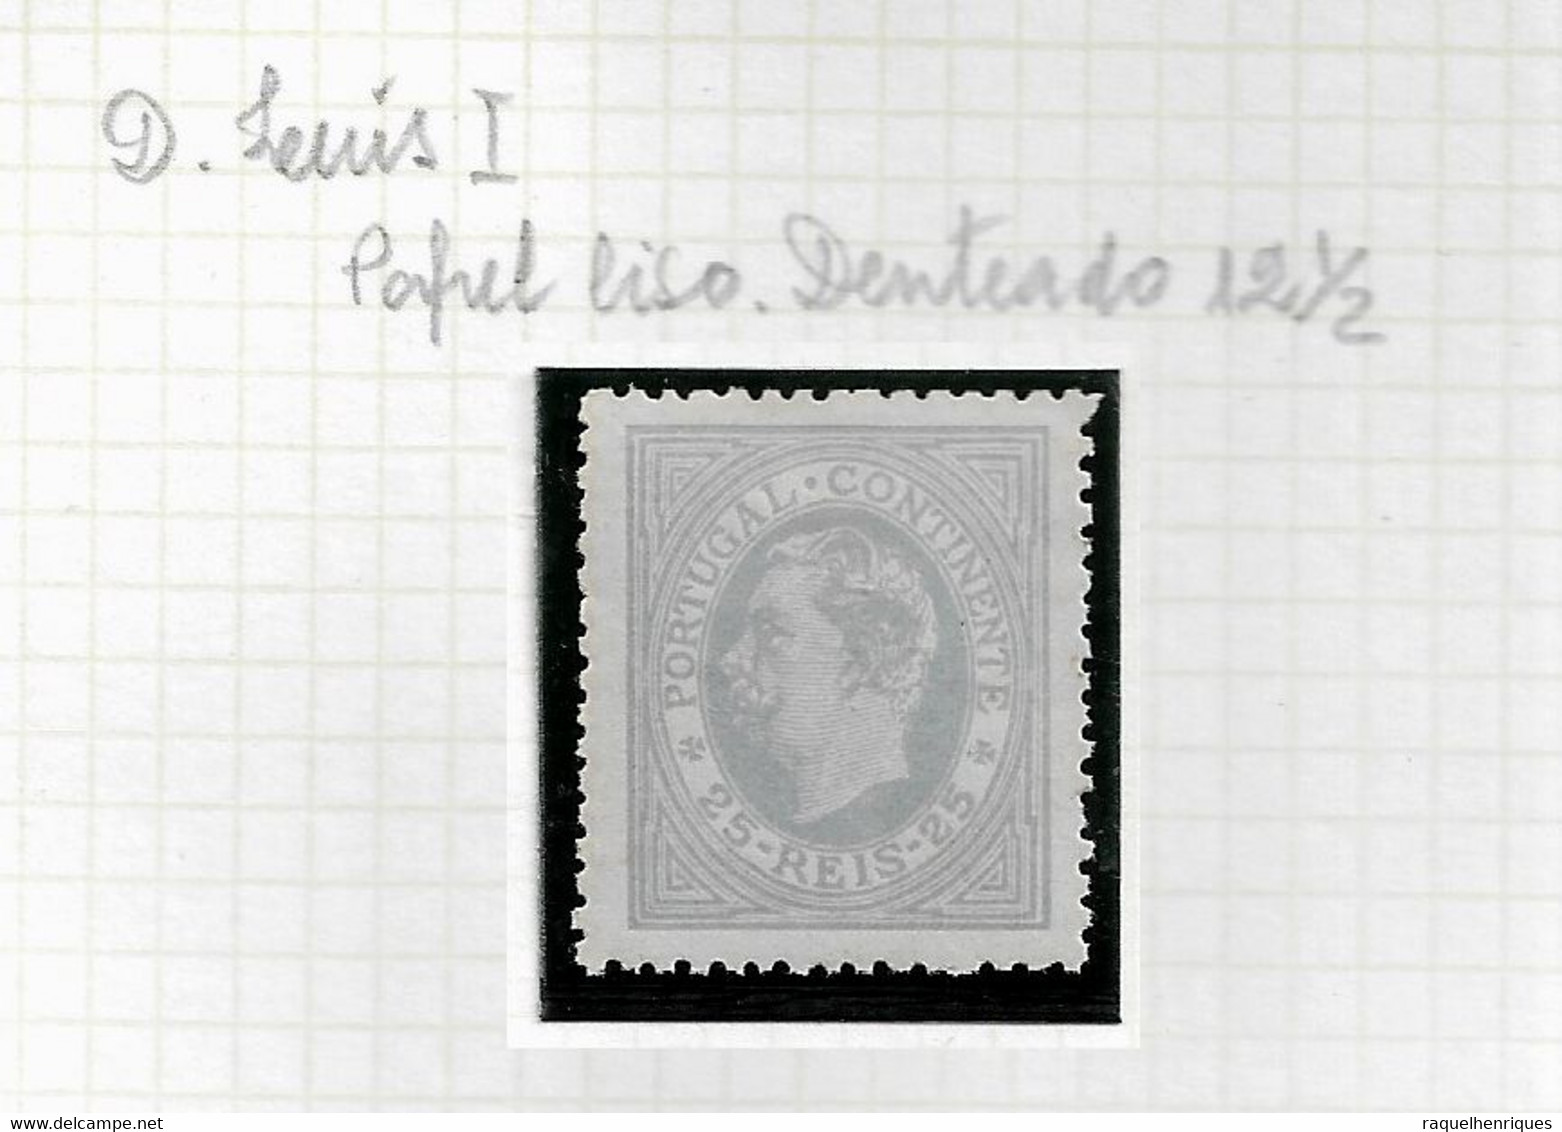 PORTUGAL STAMP - 1880-81 D.LUIS I P.LISO Perf: 12½ Md#53 MH (LPT1#140) - Neufs